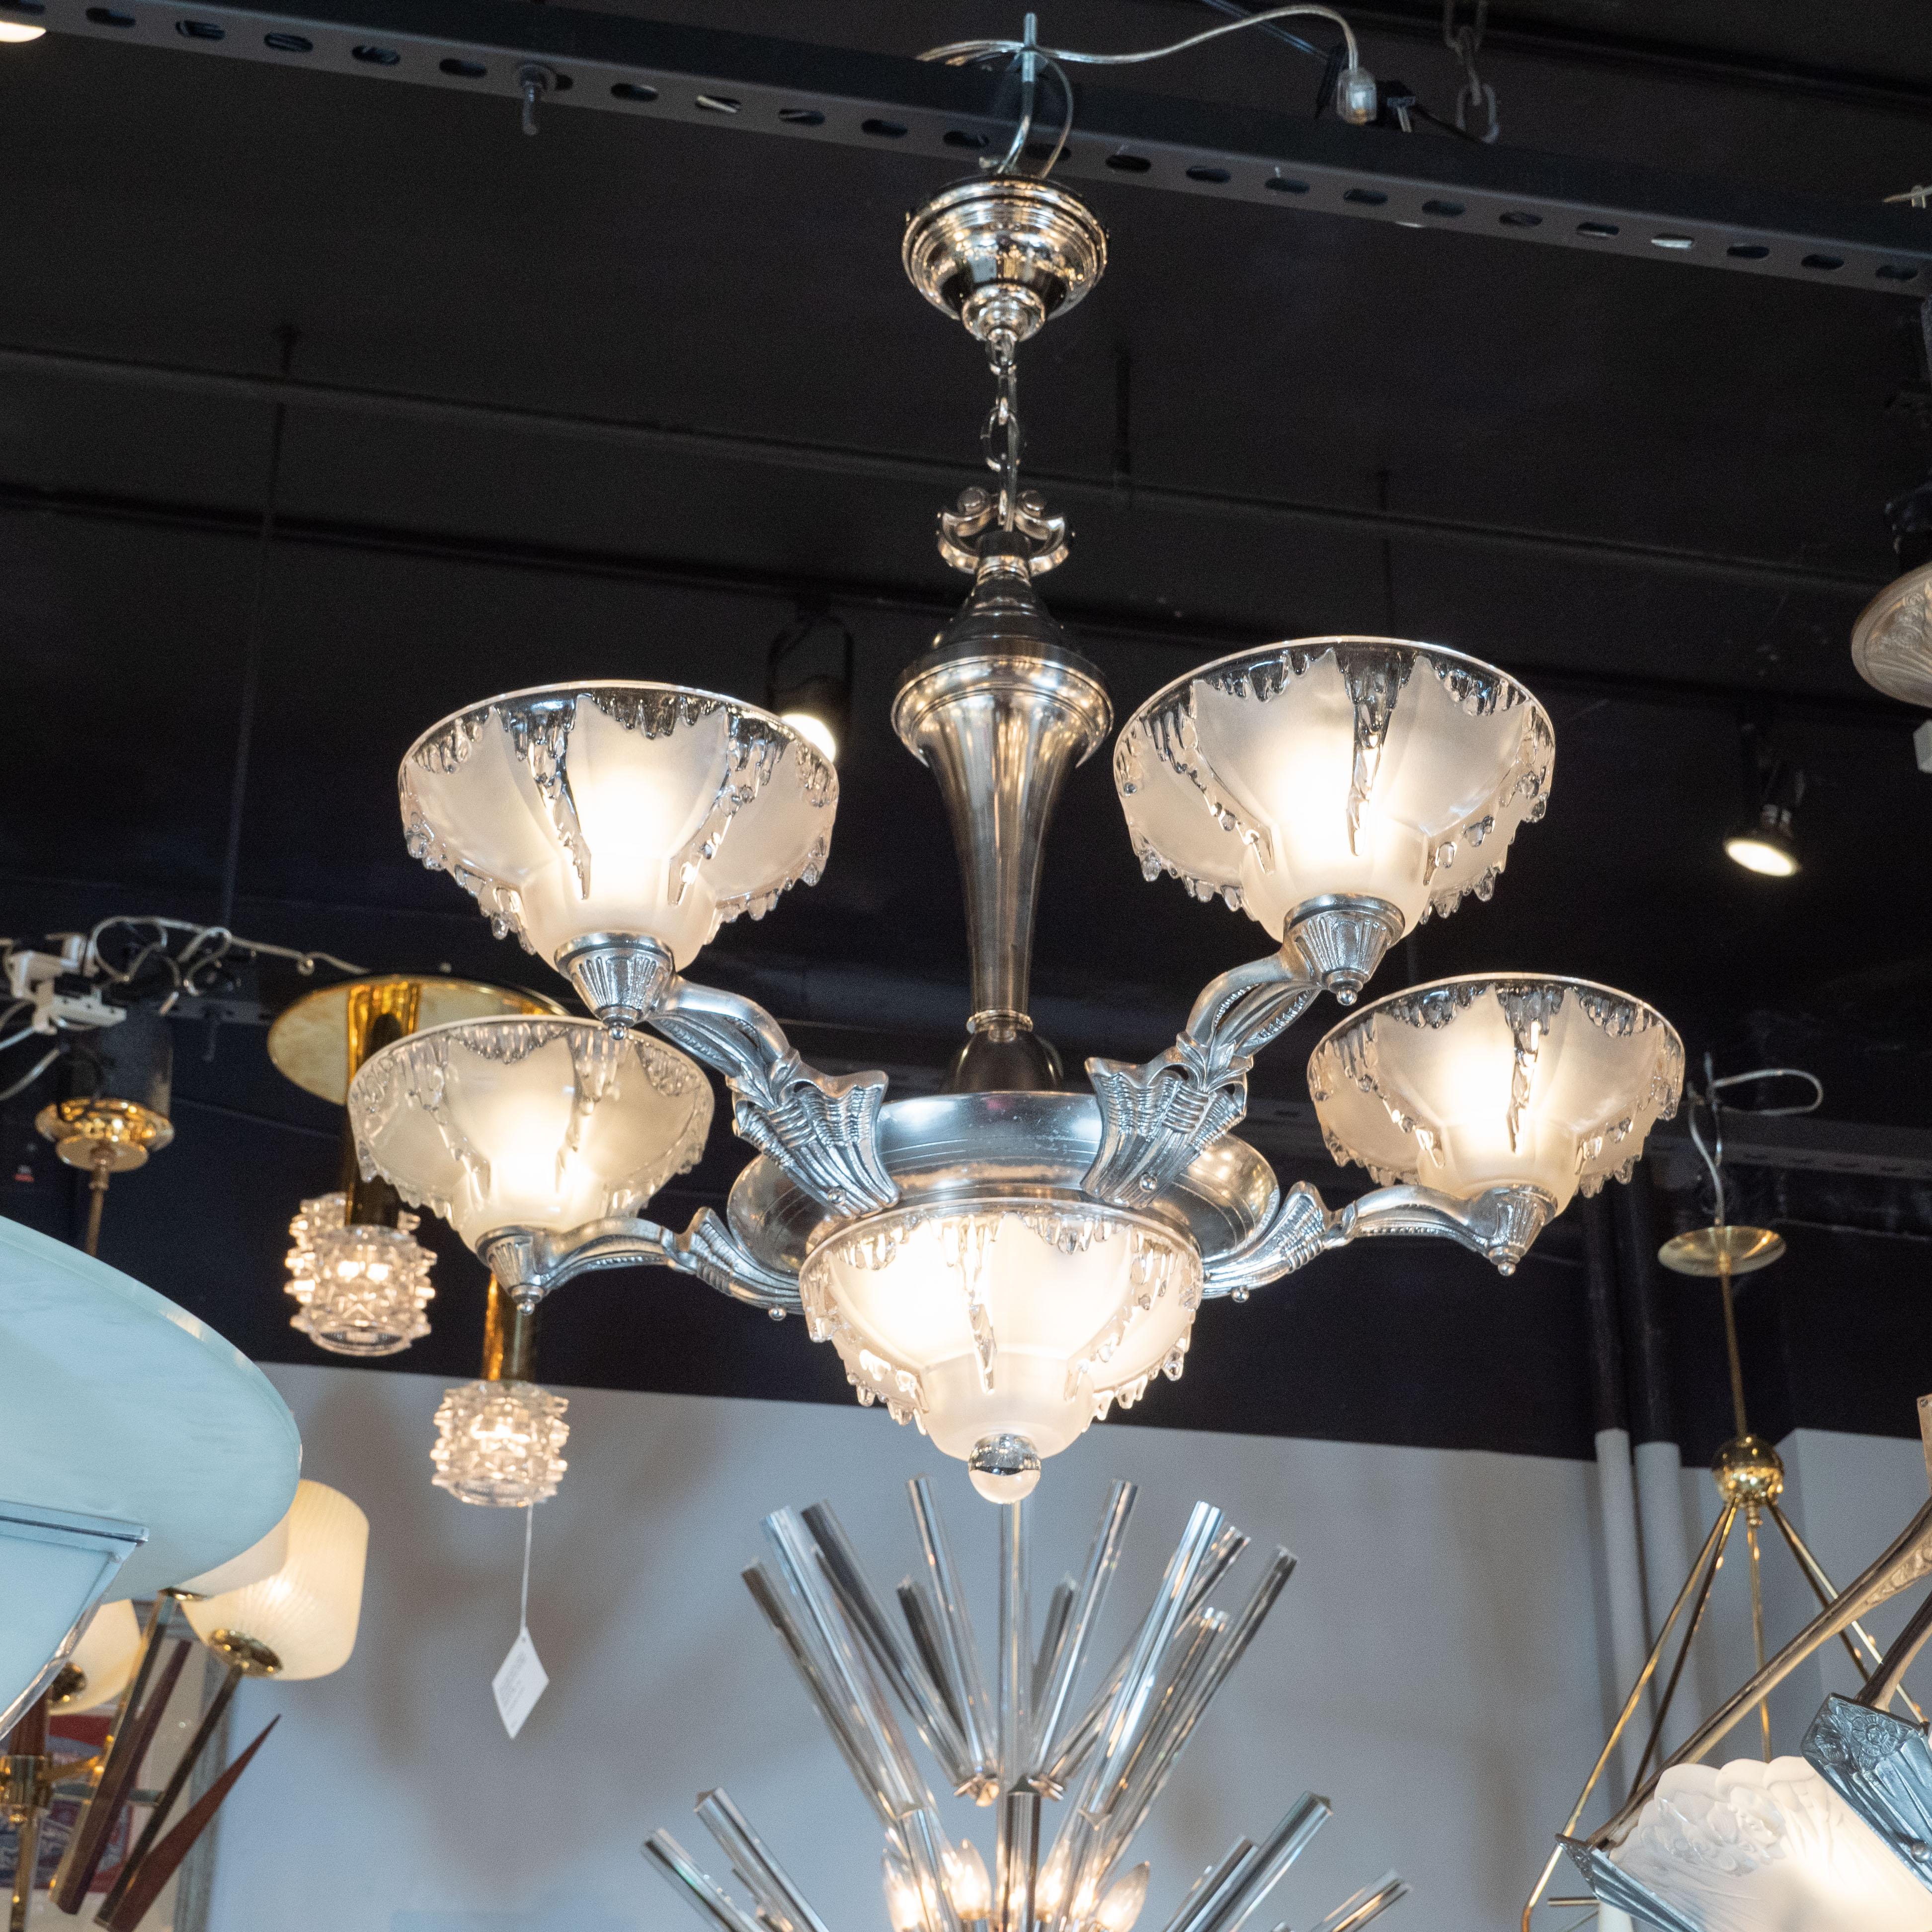 This glamorous and dramatic Art Deco five-arm chandelier was realized by the esteemed maker Ezan & Petitot in France, circa 1930. It features curved sculptural arms with abstract and geometric detailing that connect to a circular body all in